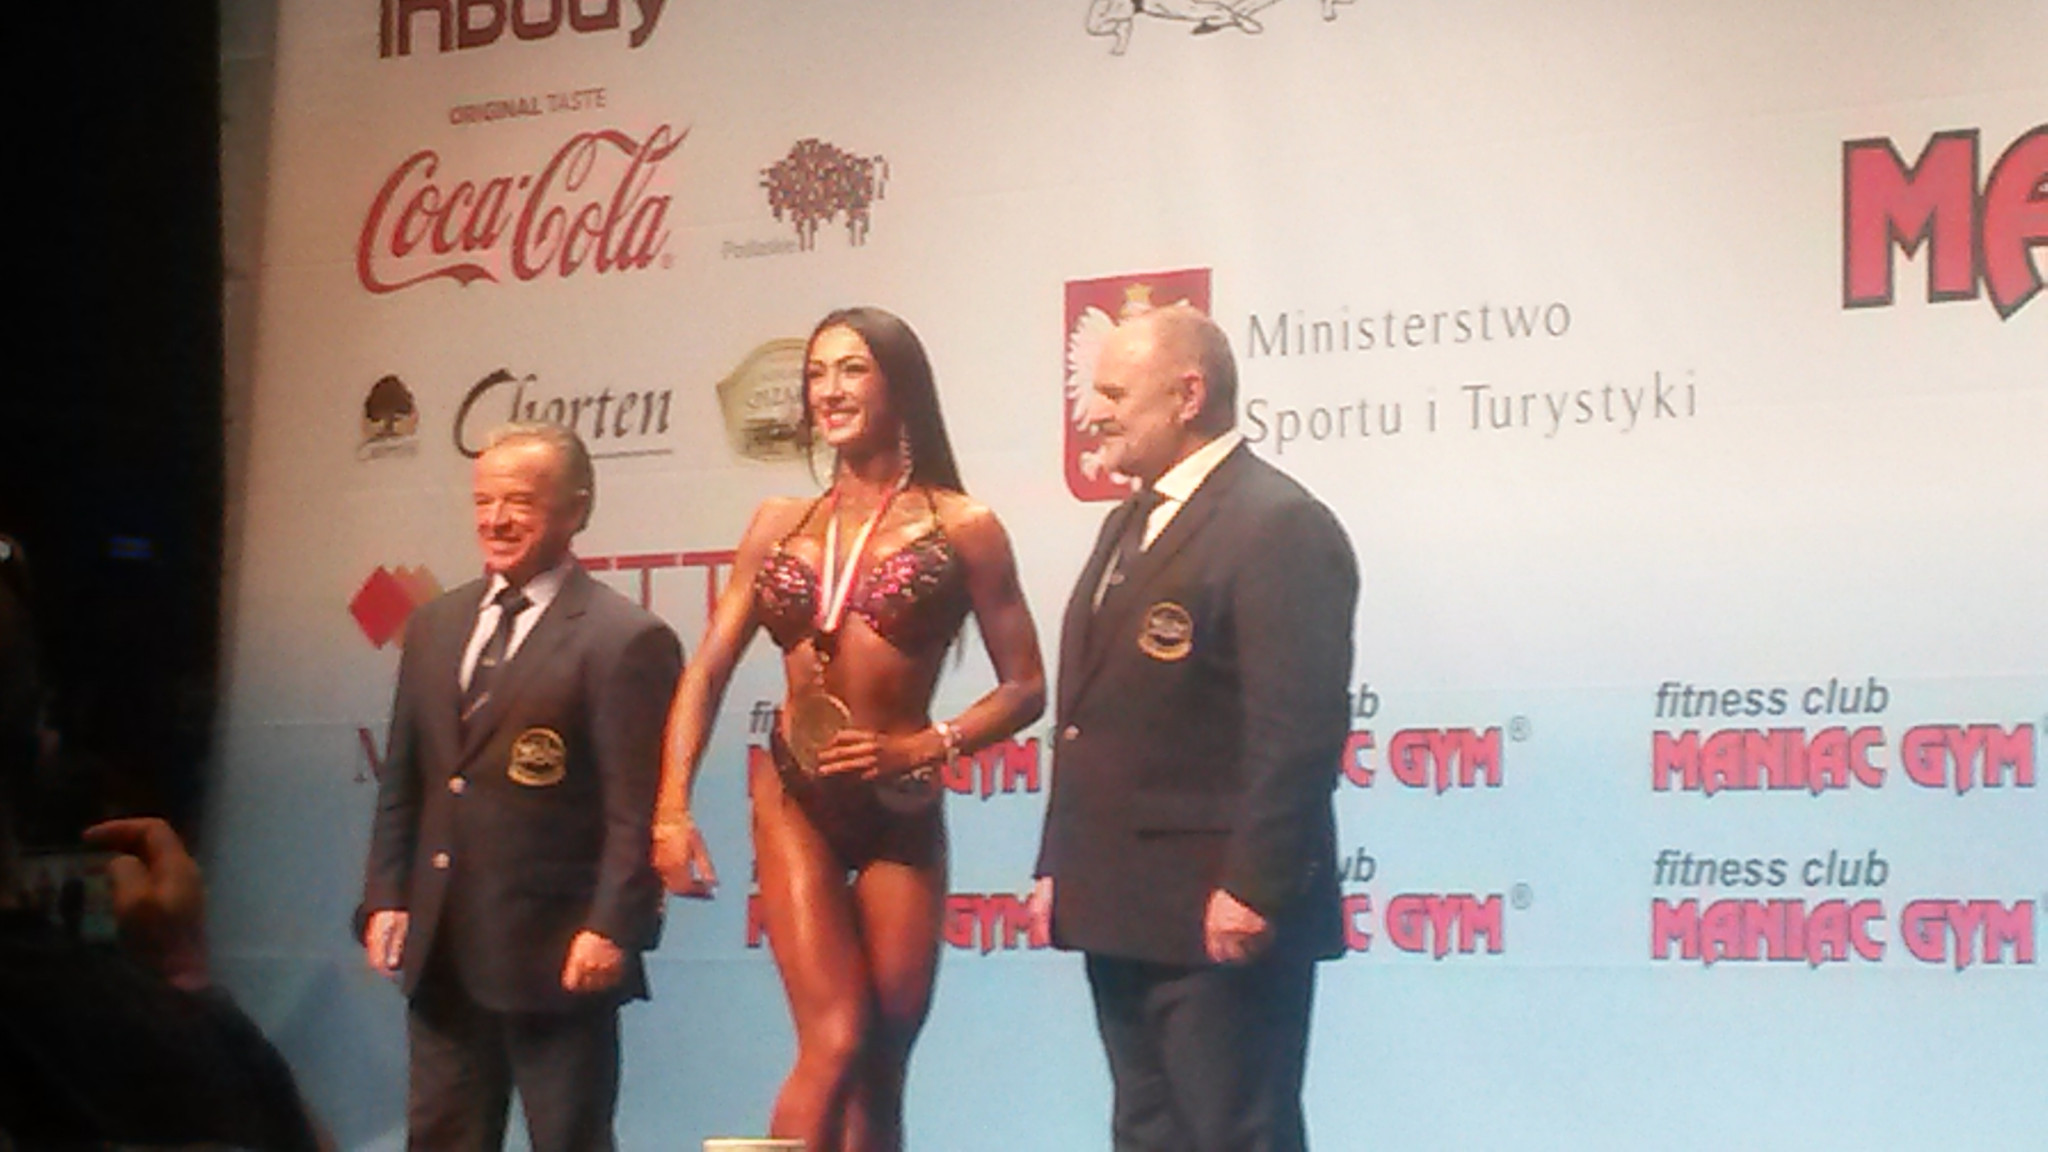 Lithuania celebrates as Ziauberyte claims overall women's bikini fitness title on final day of IFBB World Fitness Championships